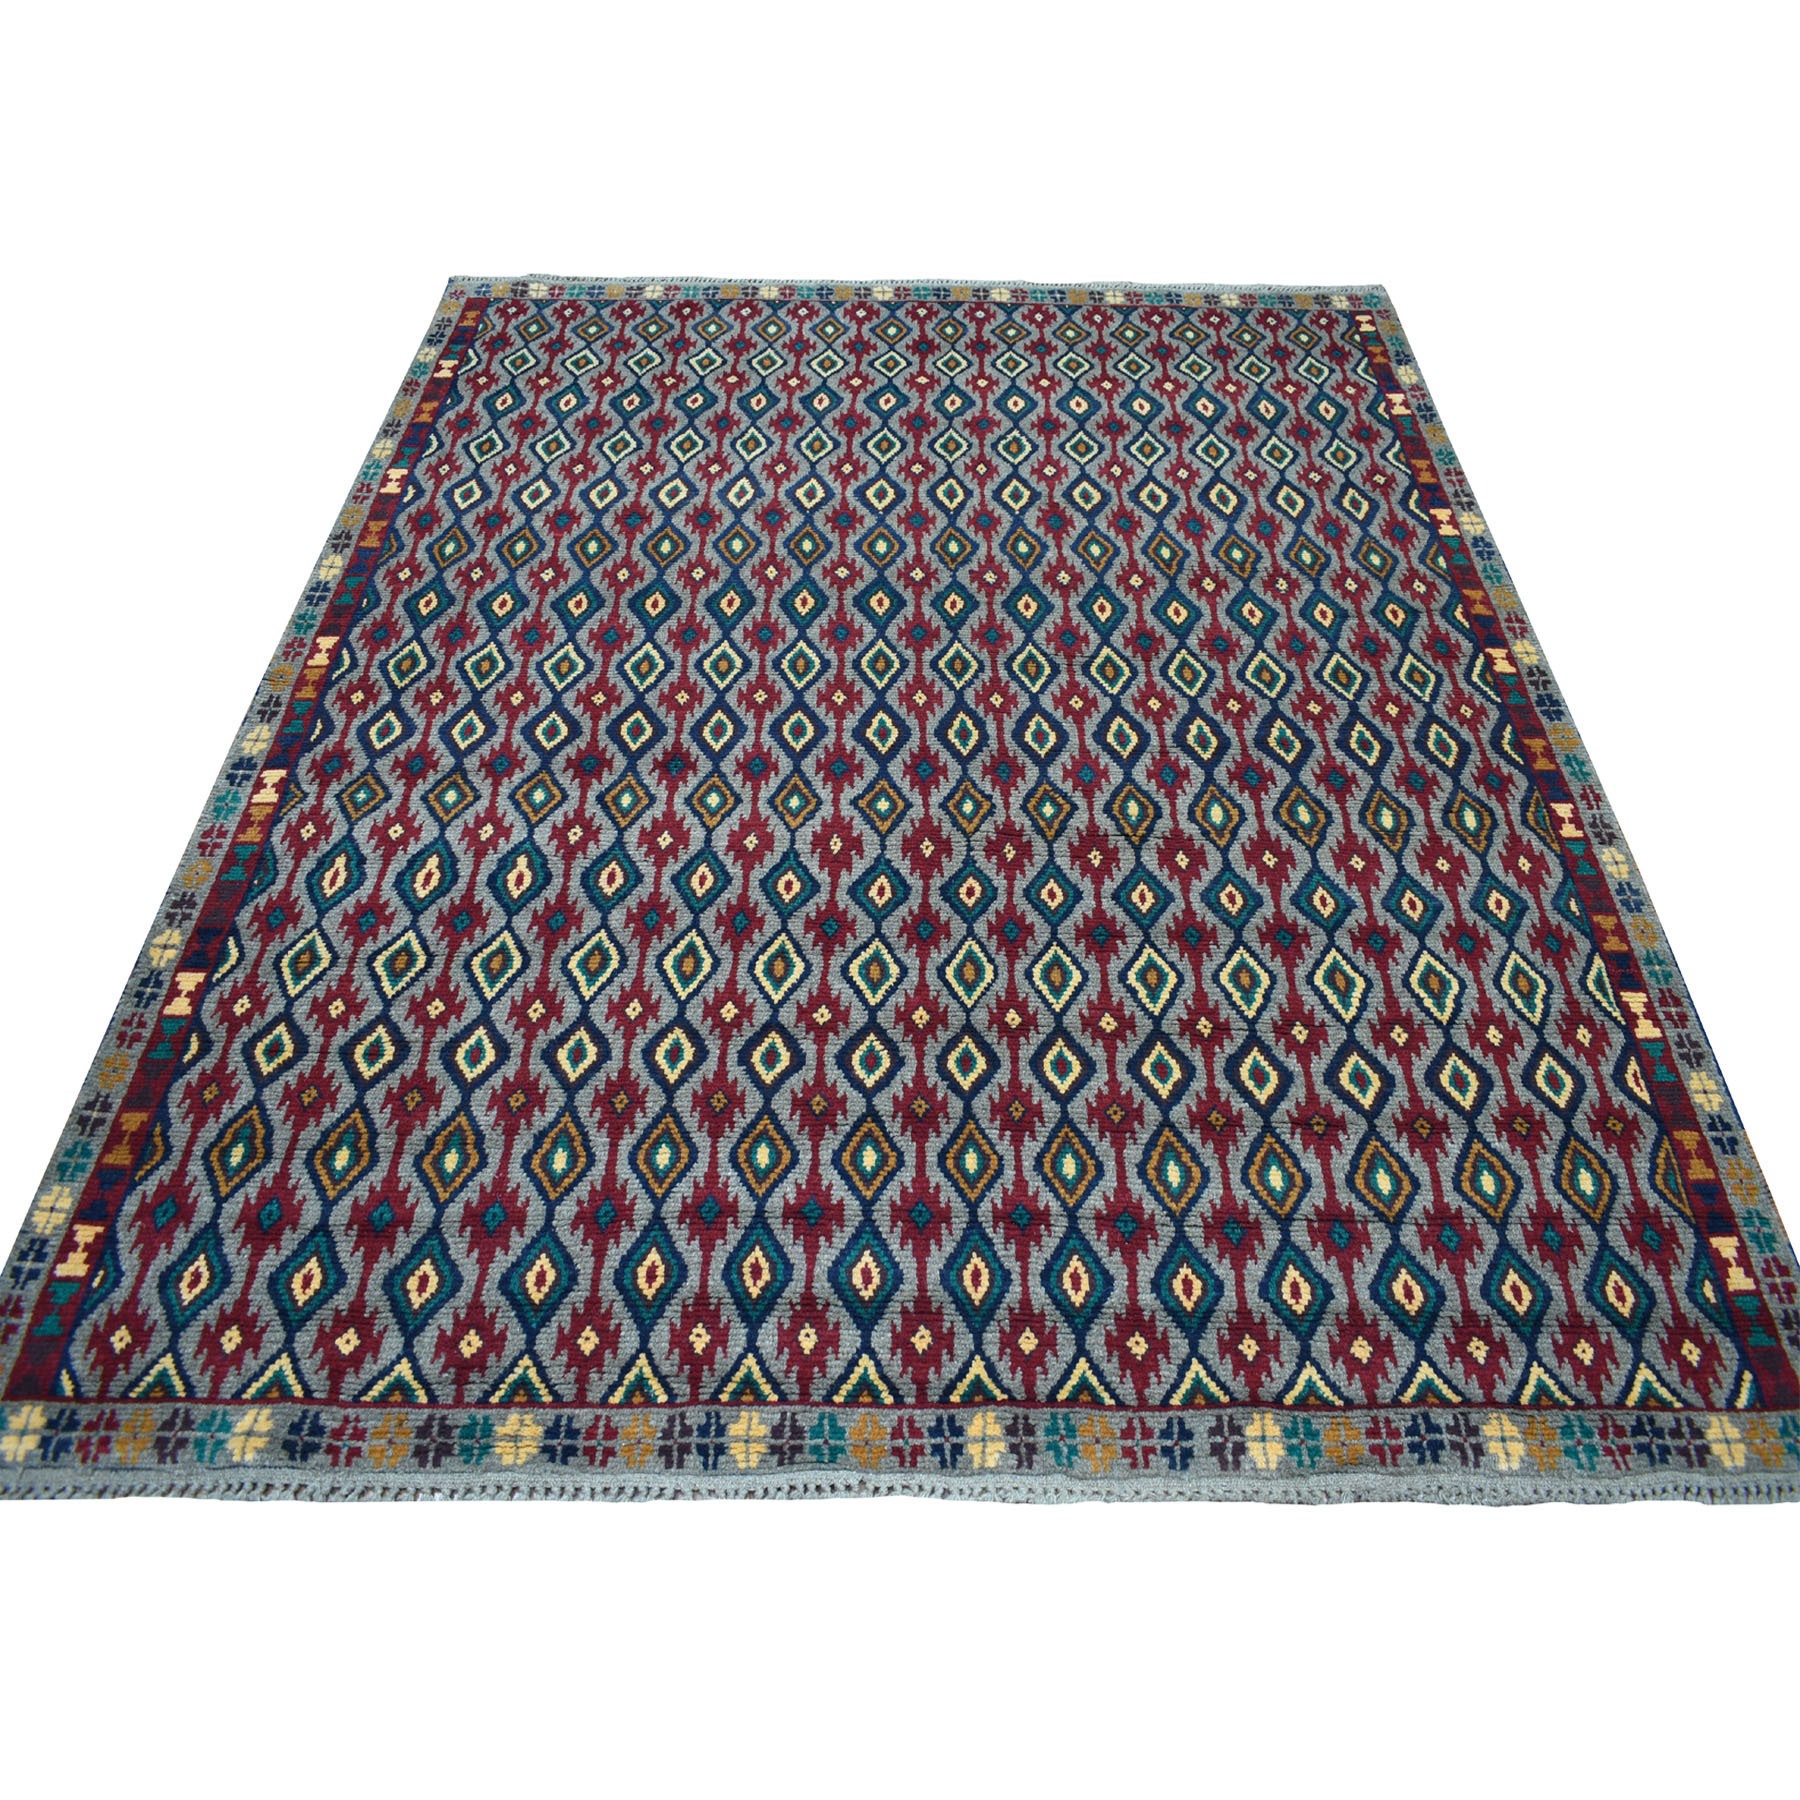 6'2"x7'3" Gray Tribal Design Colorful Afghan Baluch Hand Woven Pure Wool Oriental Rug 